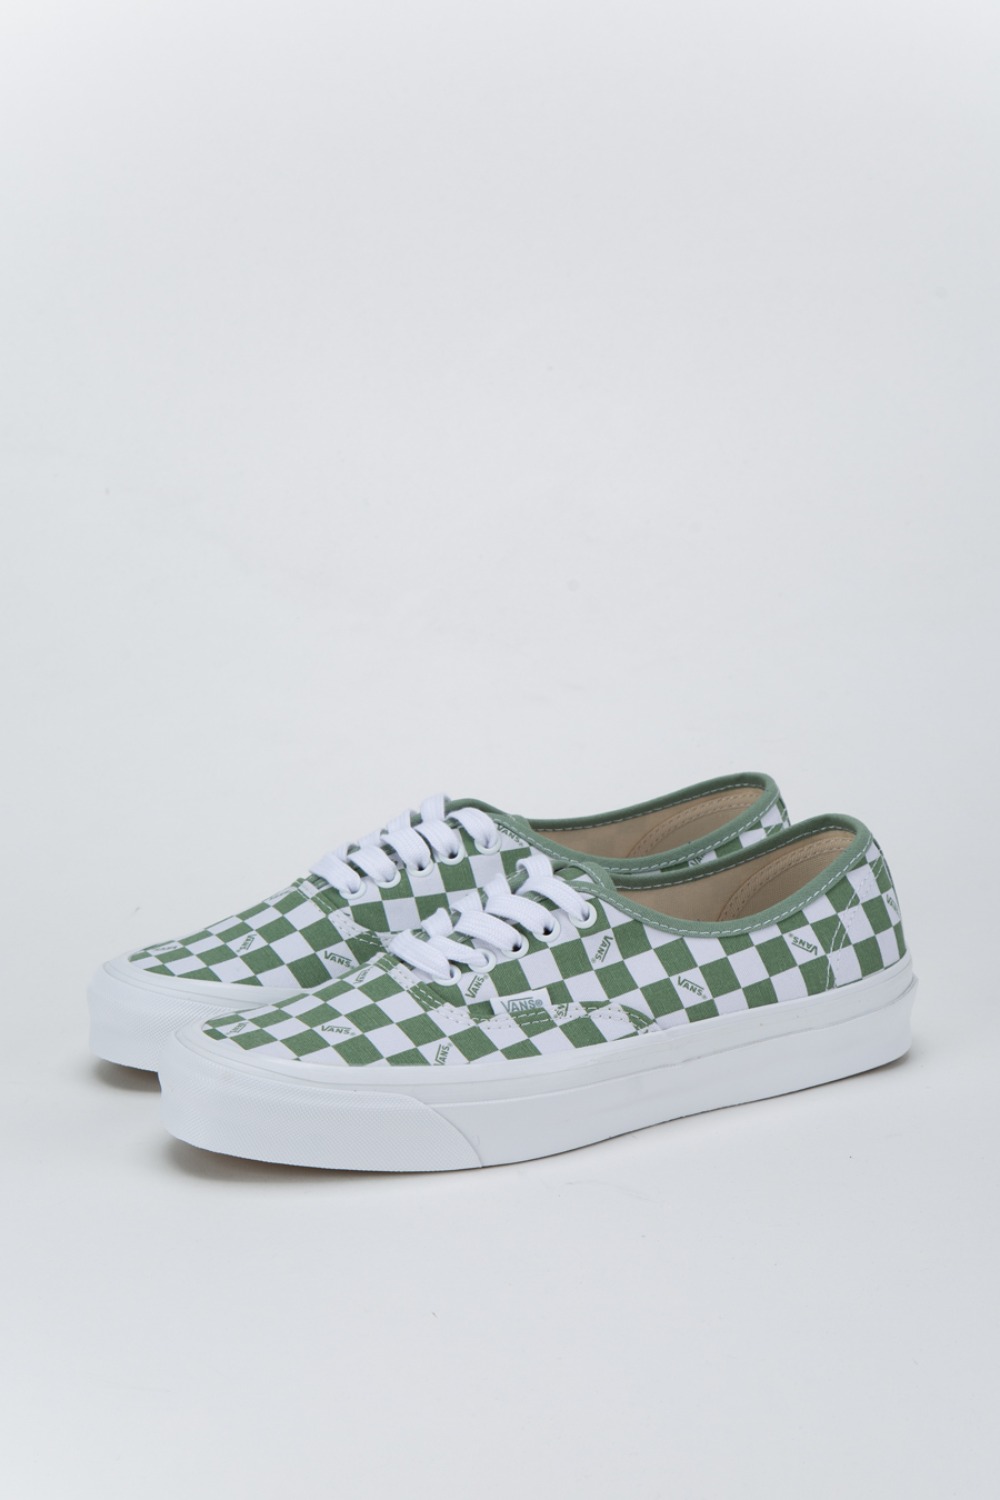 OG AUTHENTIC LX VAULT CHECKERBOARD LODEN